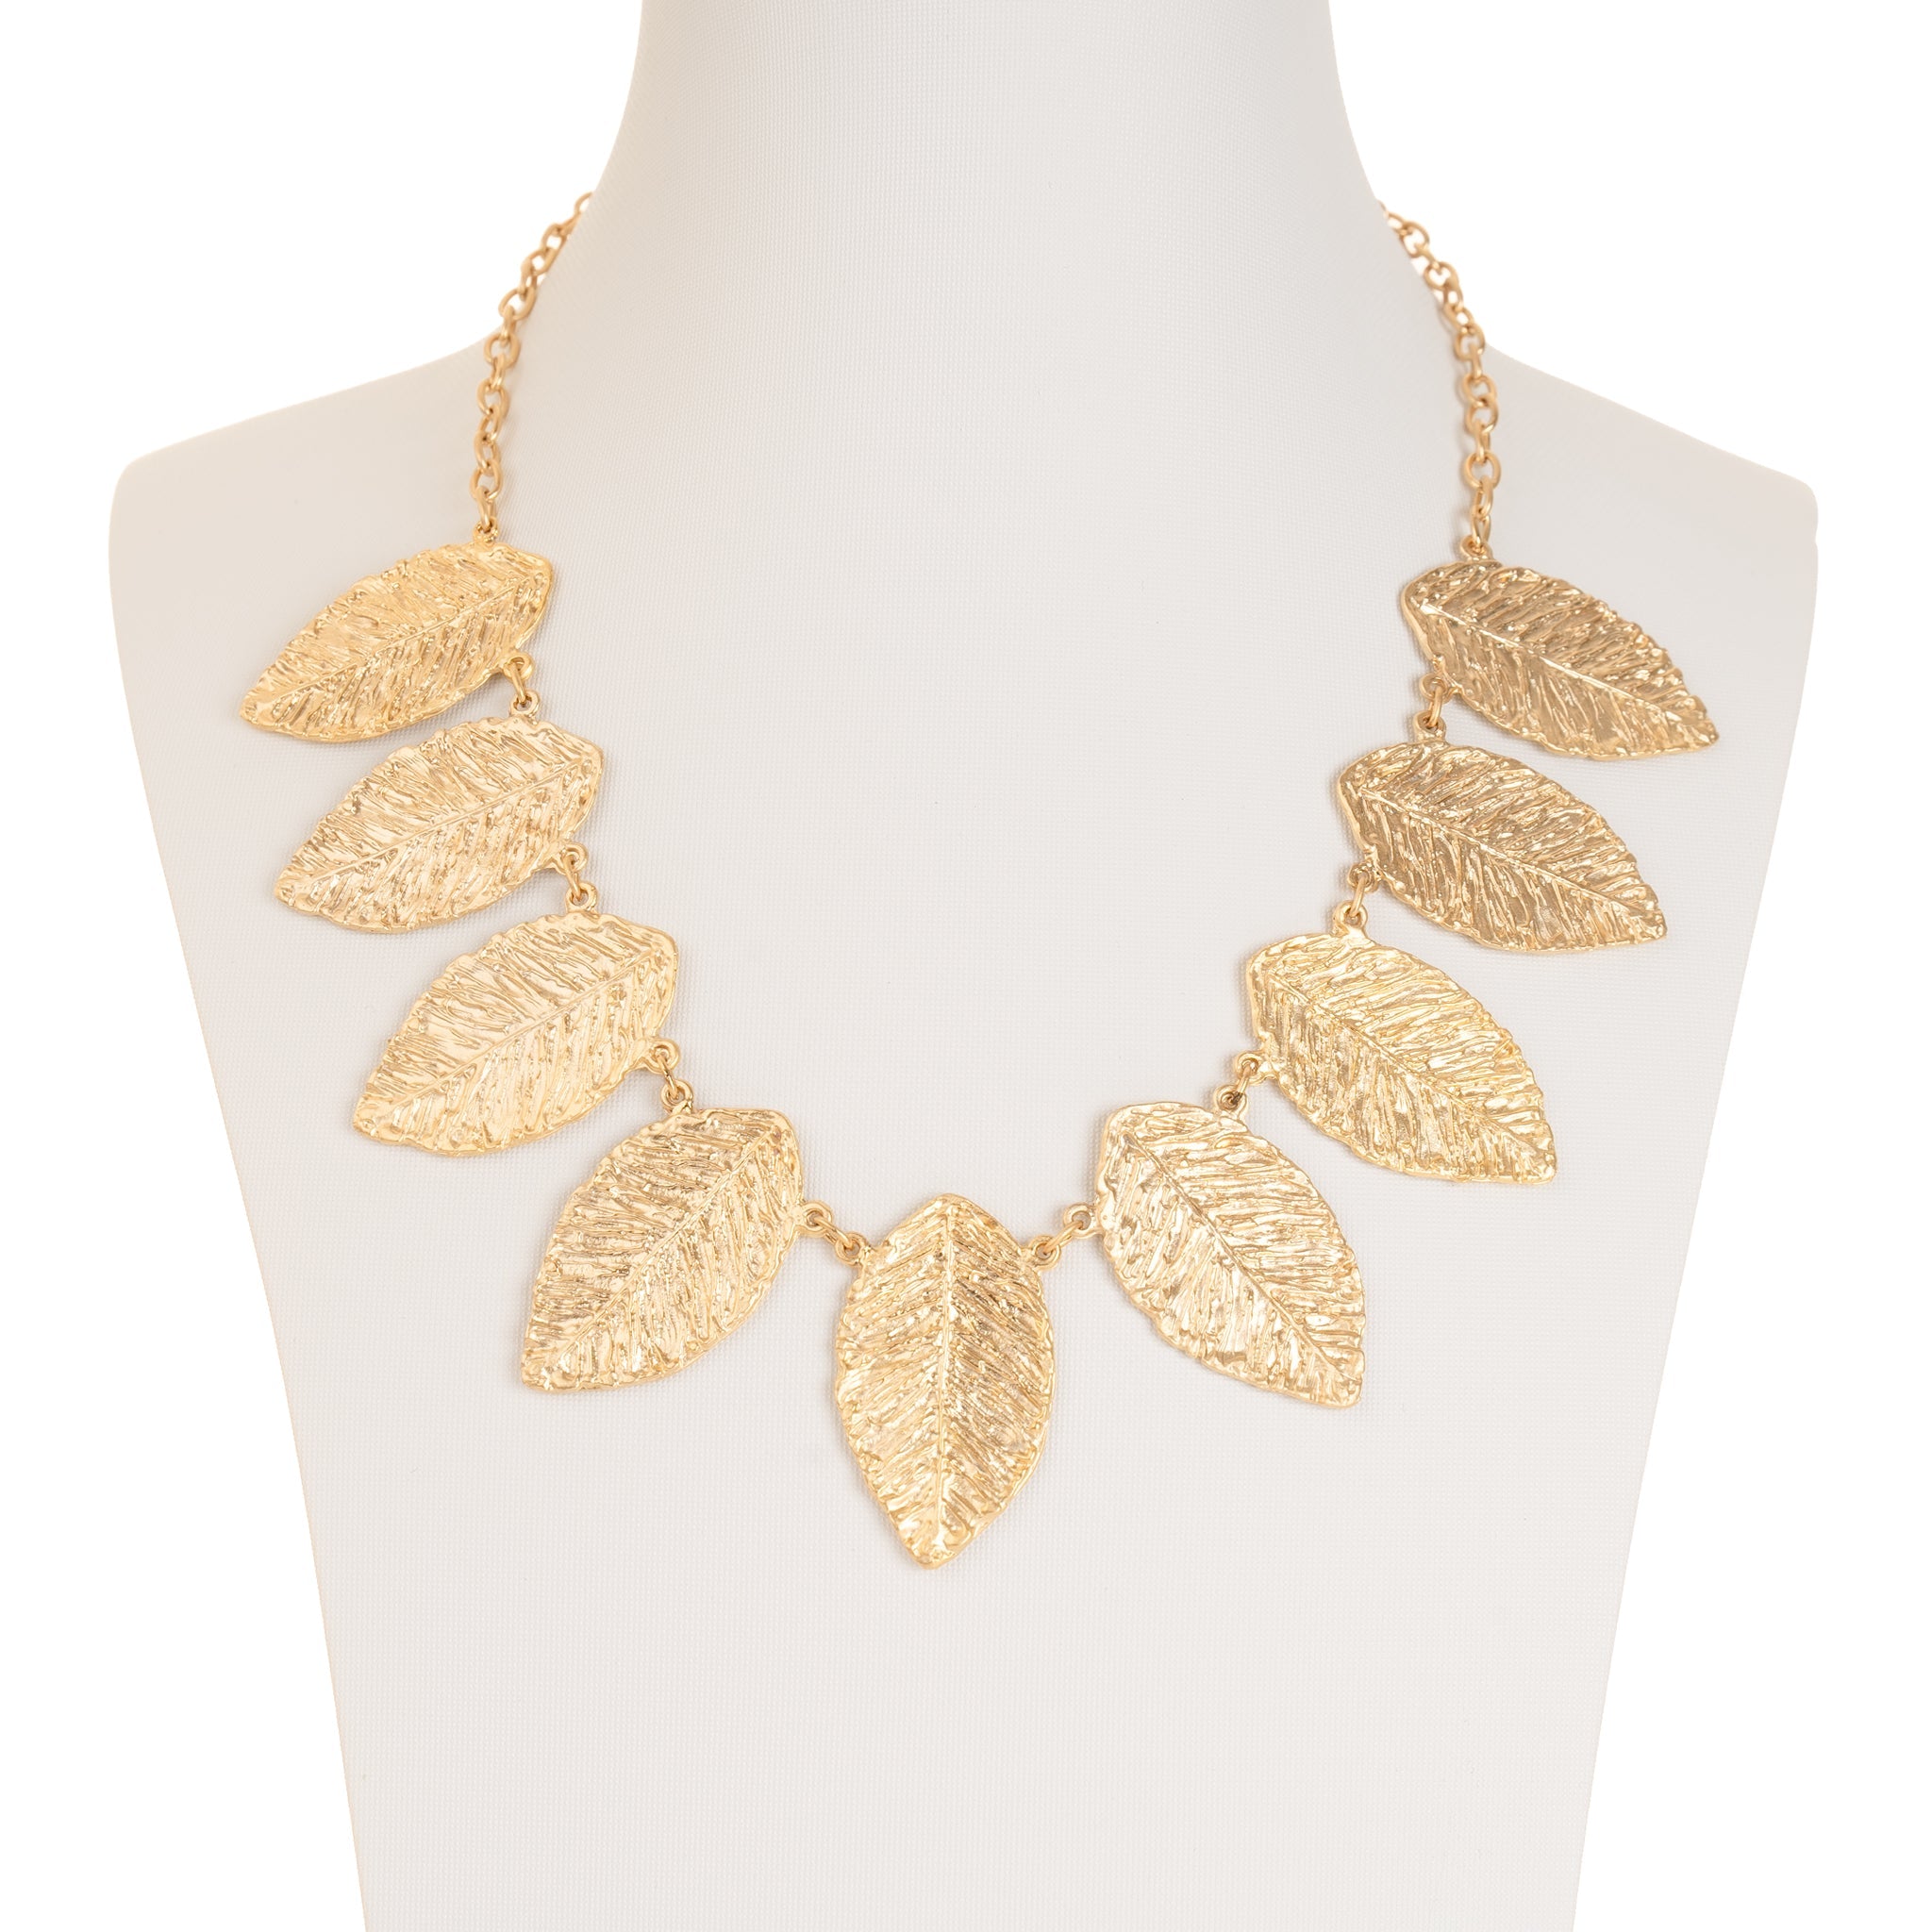 Aspen Gold Necklace and Earrings Set - Cherry Blossom